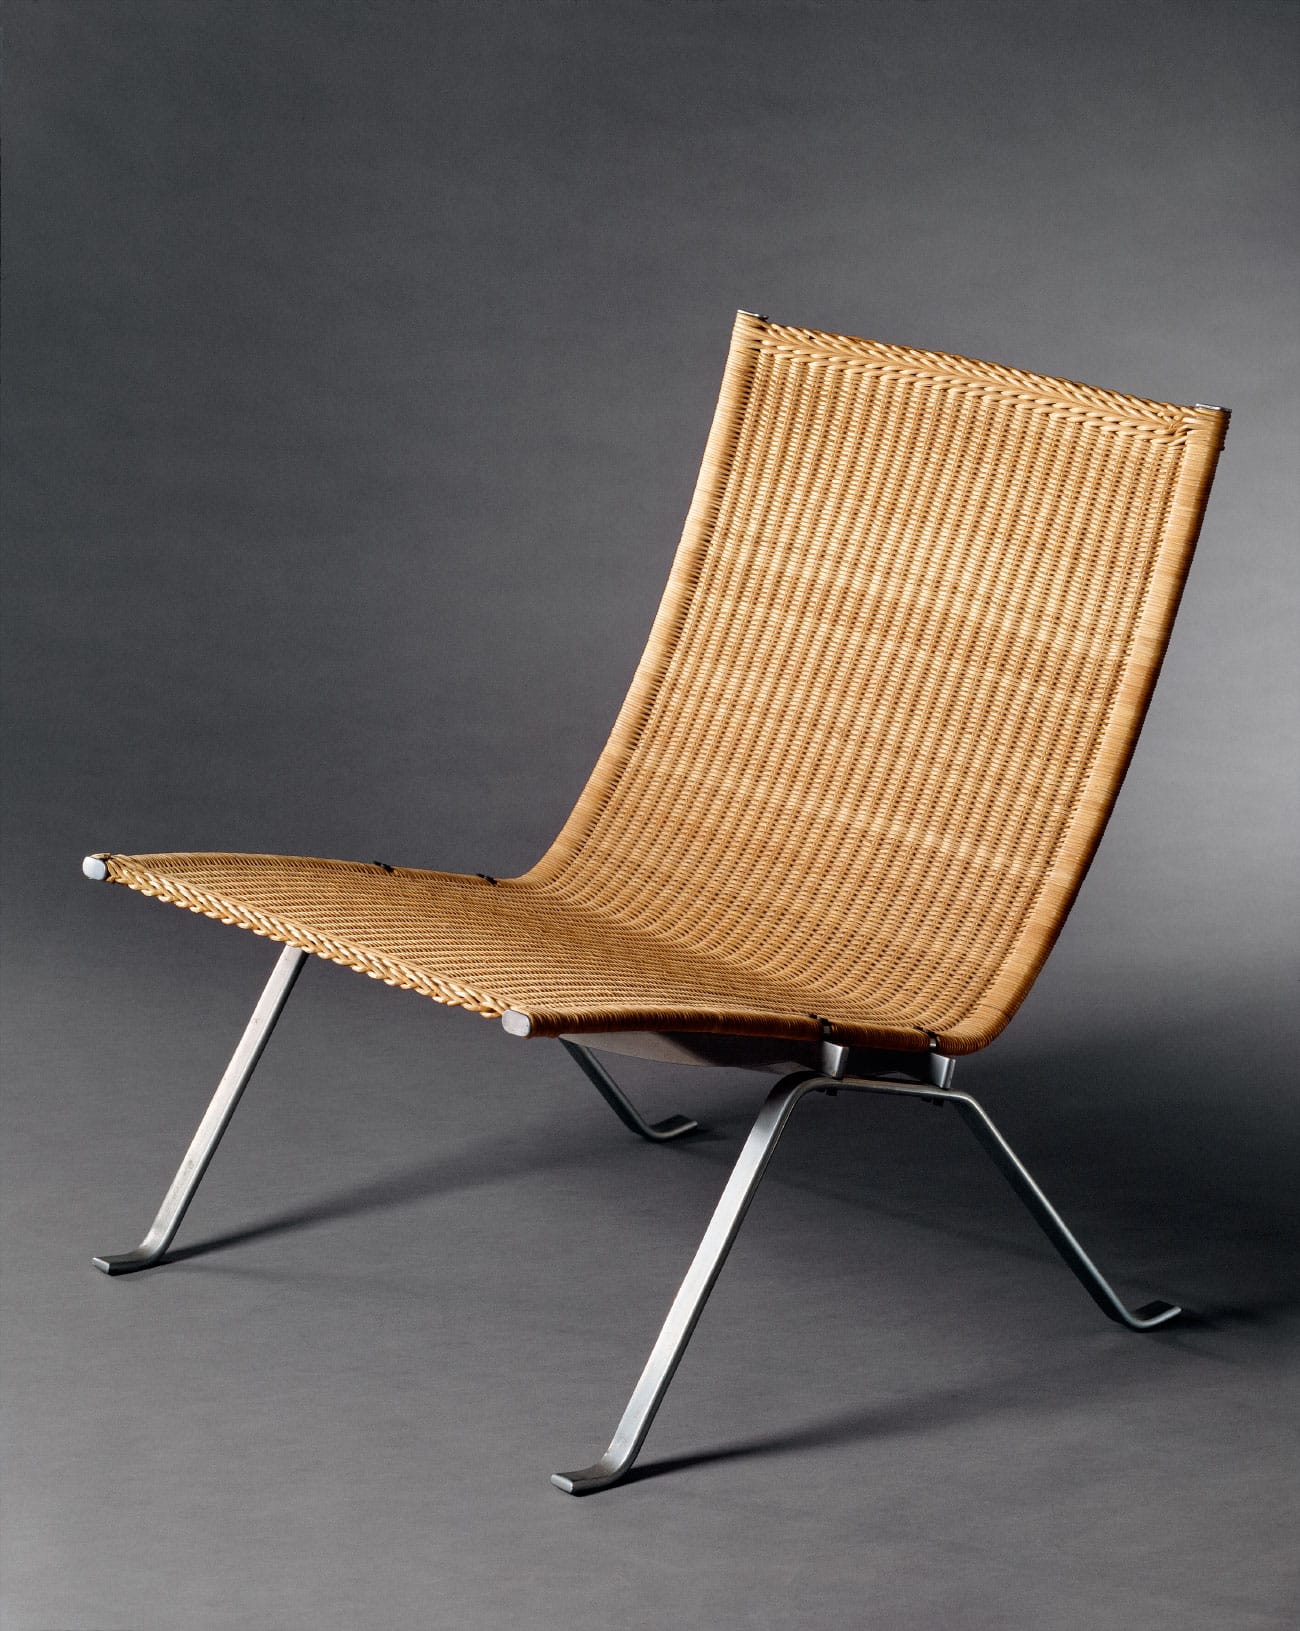 113 Chairs That Prove Danish Design Isn’t Limited to Denmark